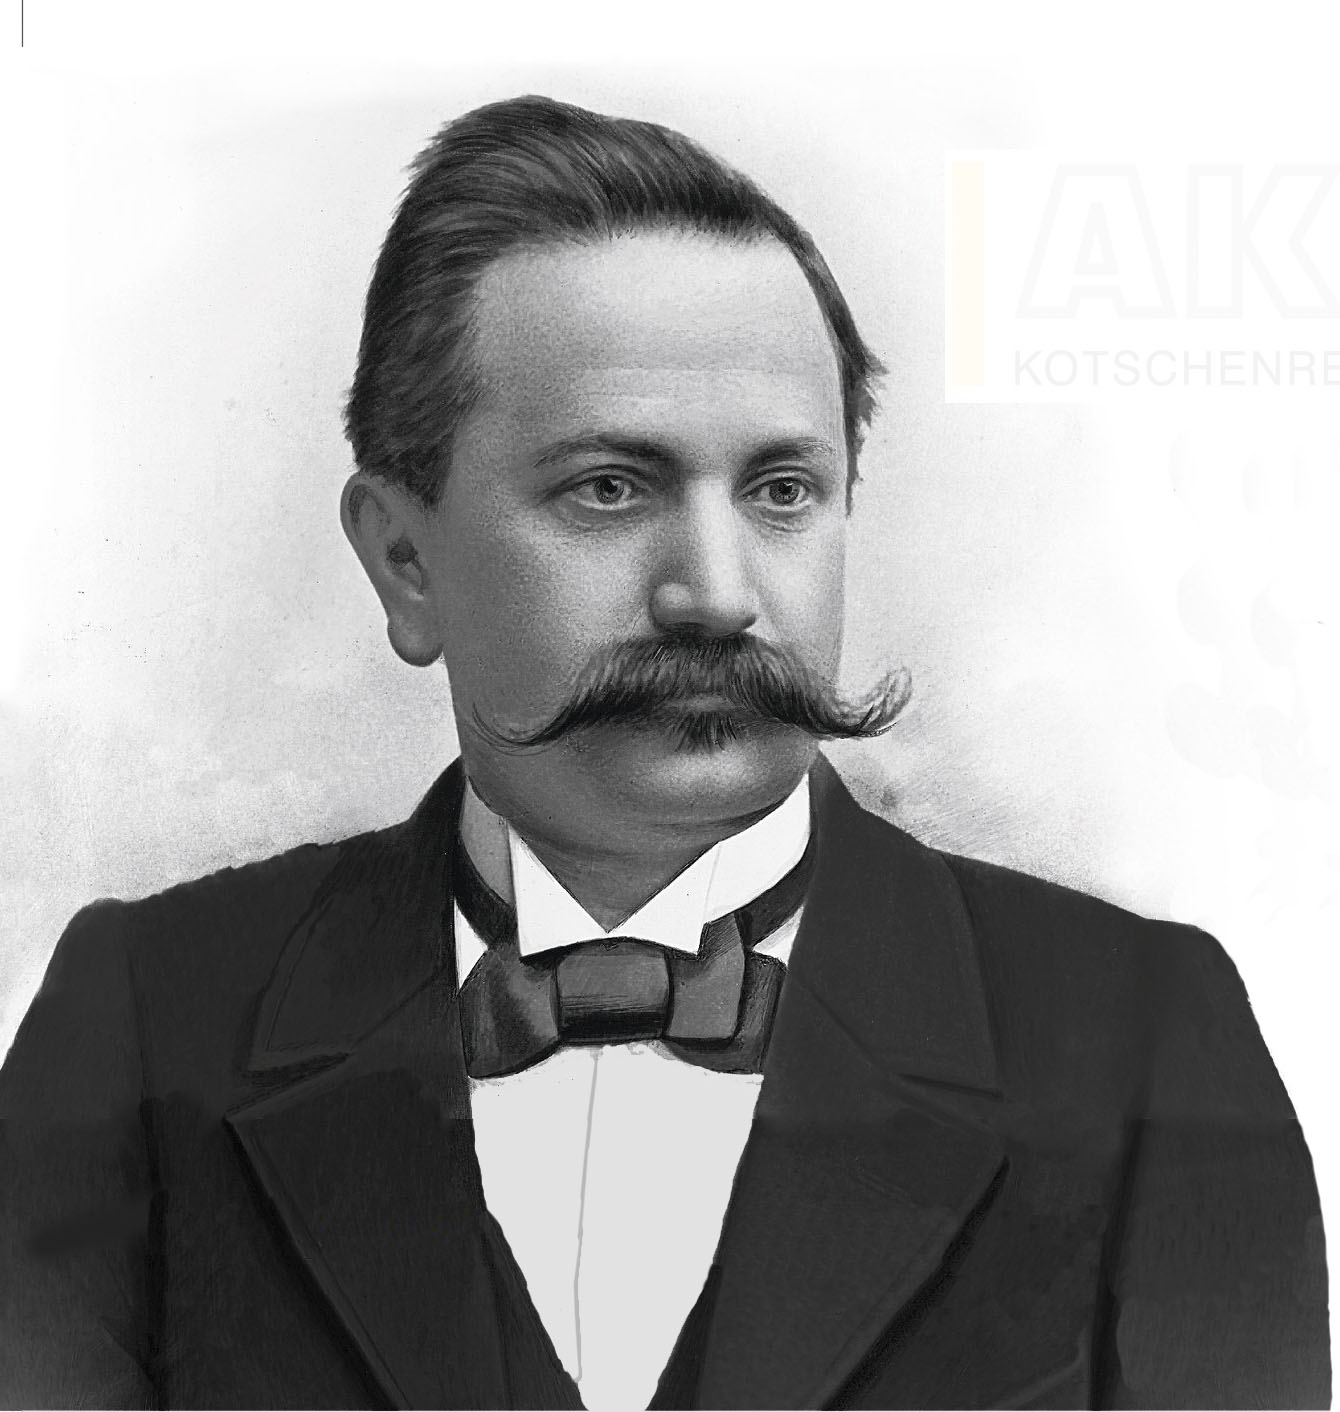 Akra Andreas Kotschenreuther